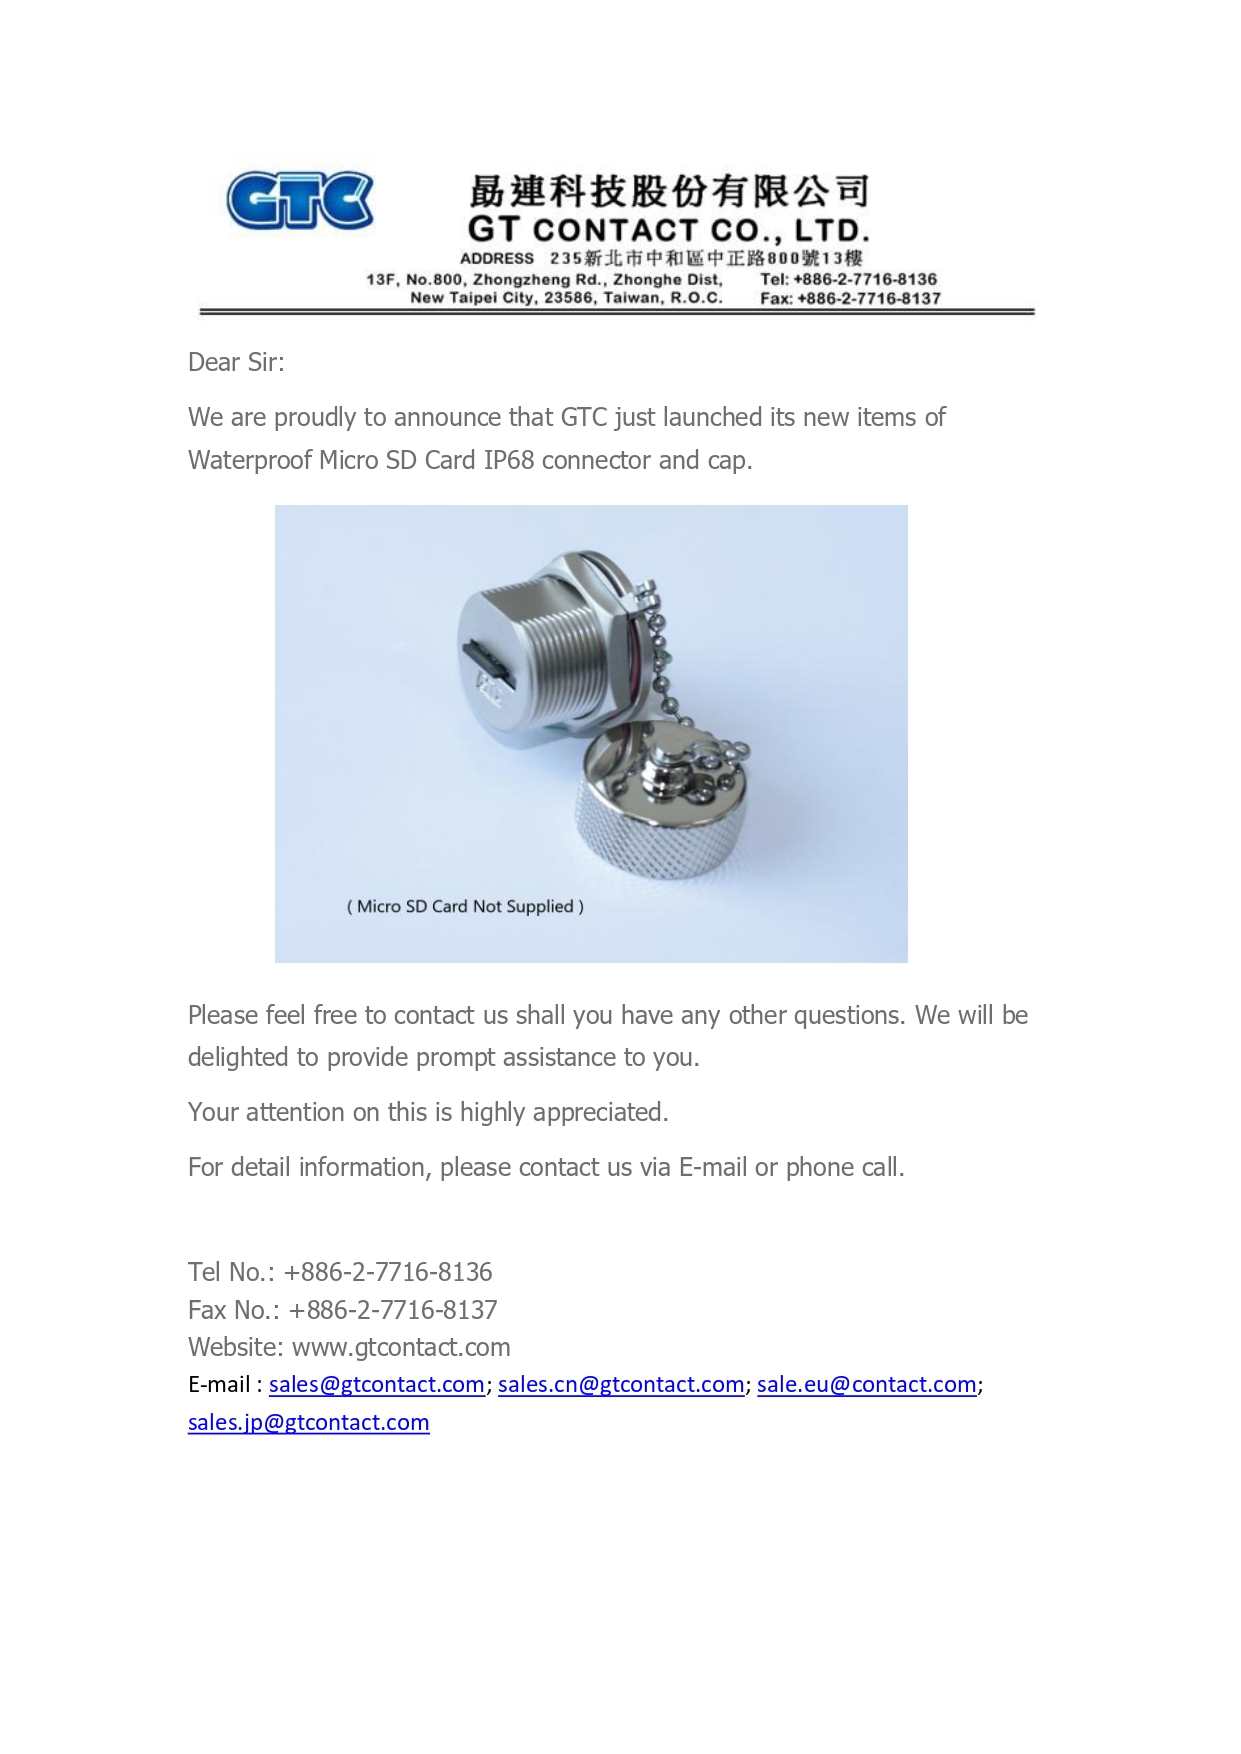 2022-5-24：News Letter -New products release - Waterproof Micro SD Card Connector (IP68)